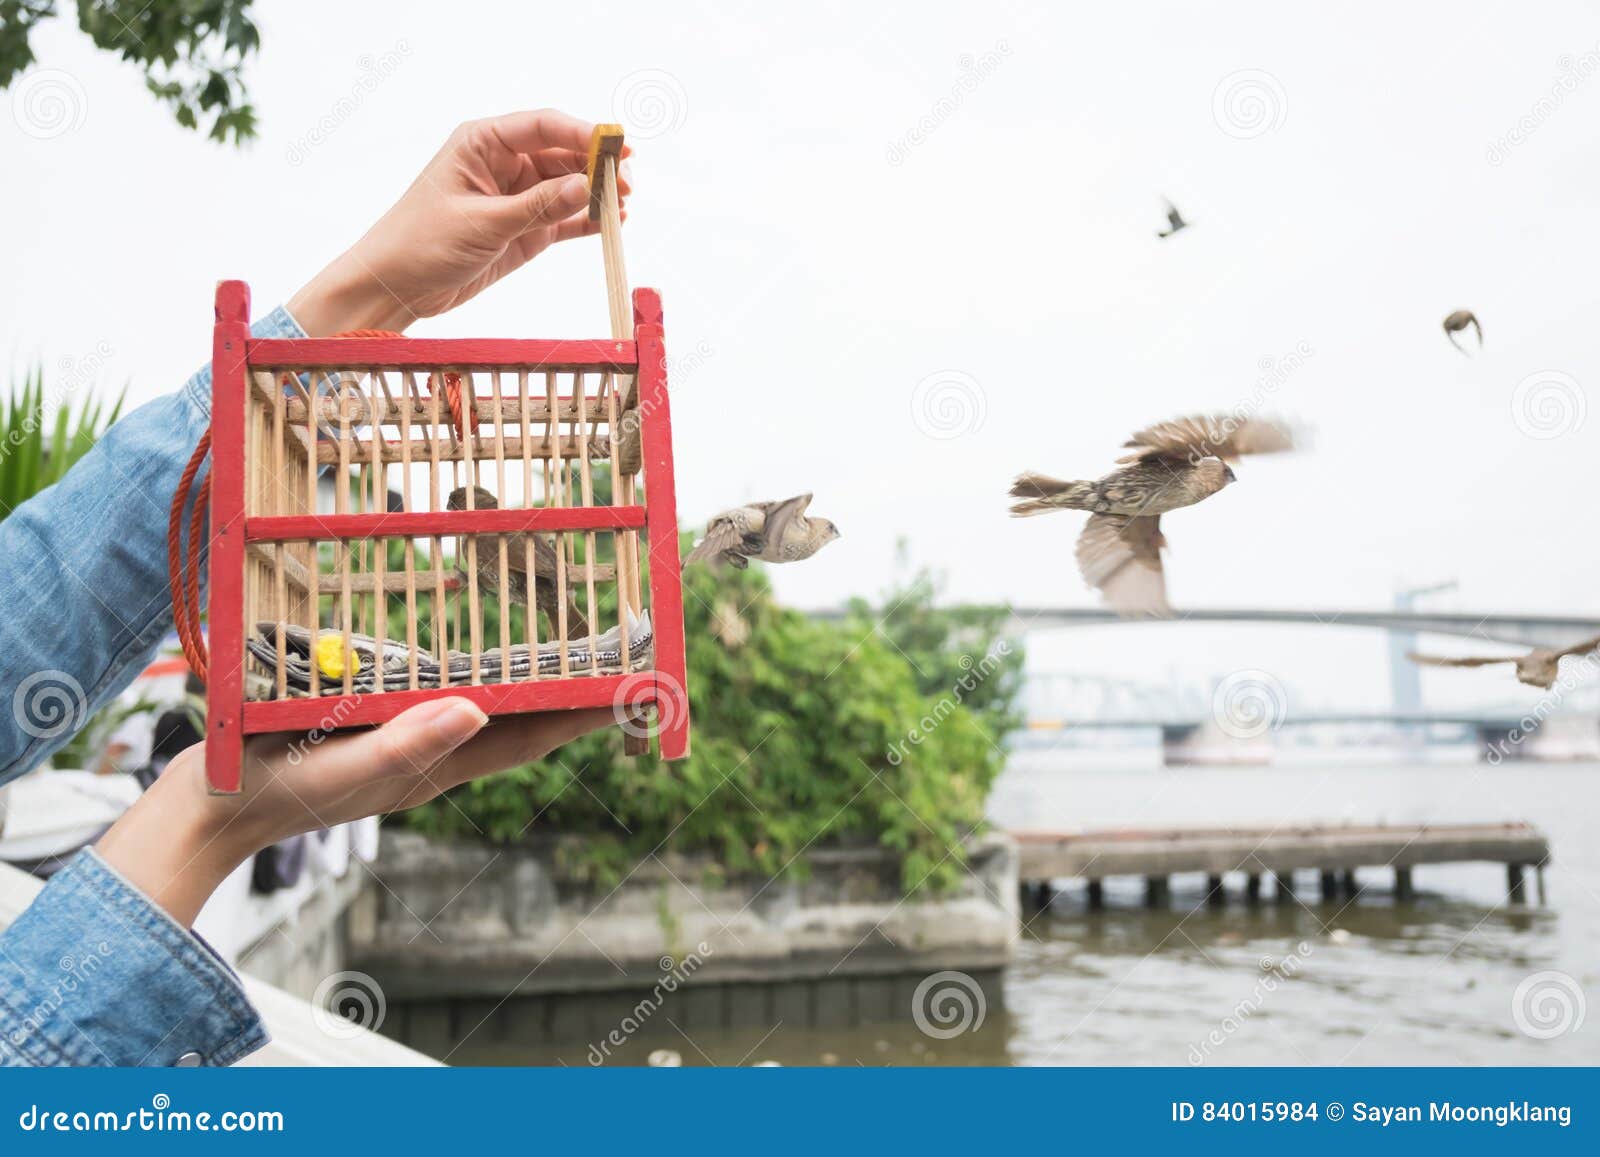 hand holding a bird cage for liberation.